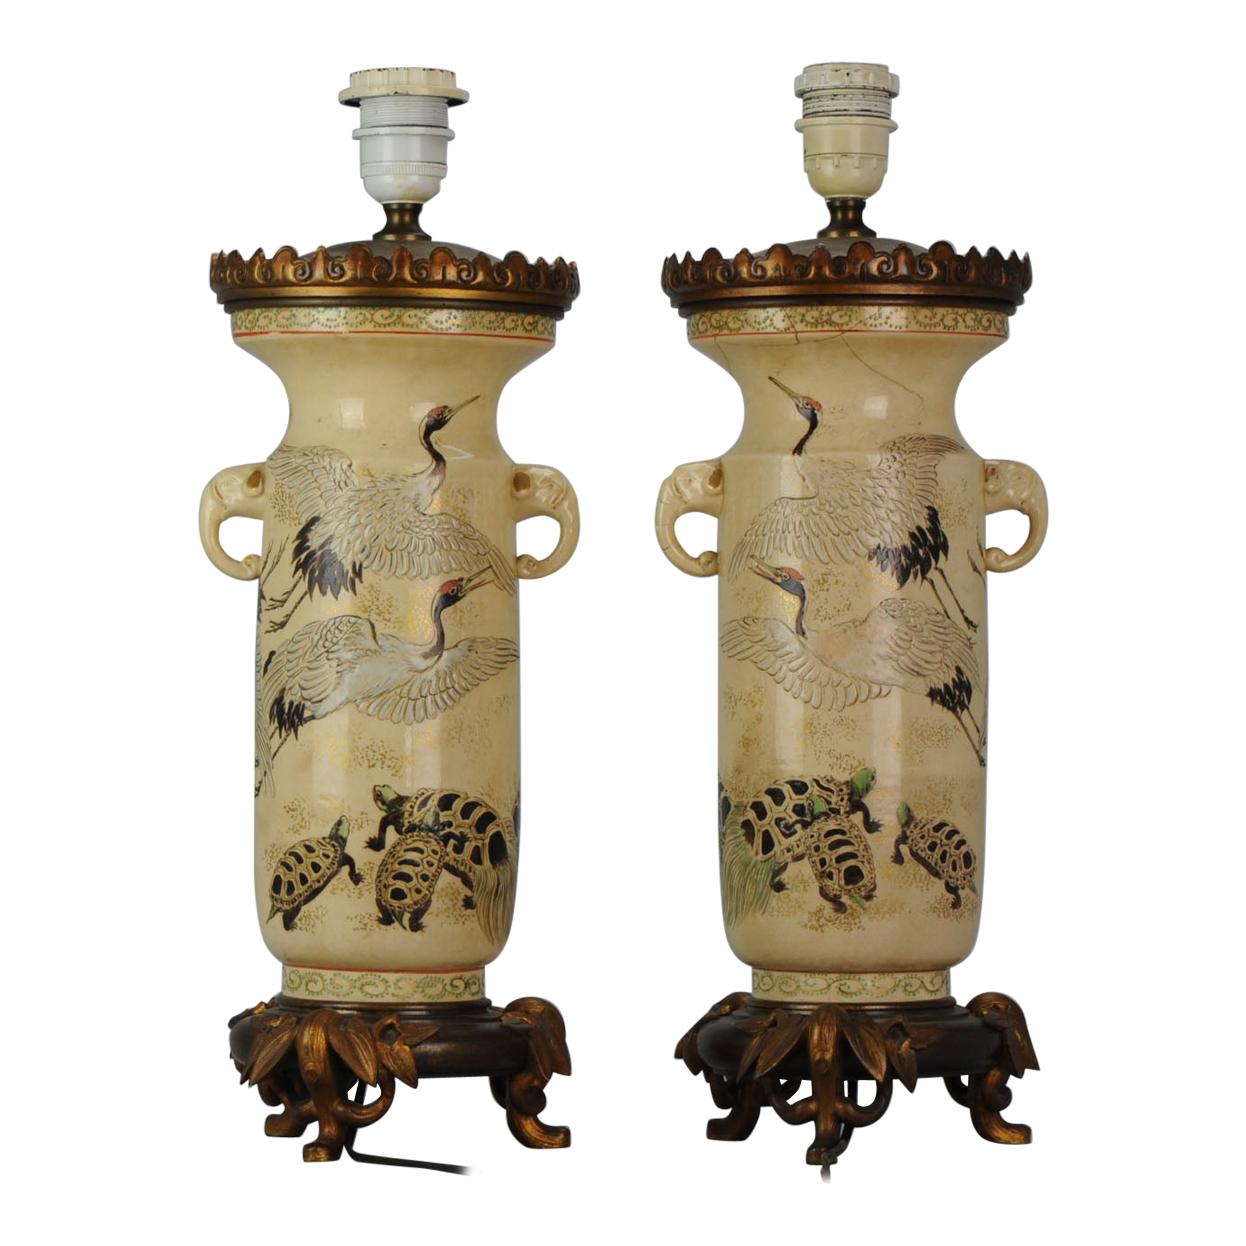 Lovely Antique Satsuma Lamp Vase Set with Cranes and Turtles, Japan 19th Century